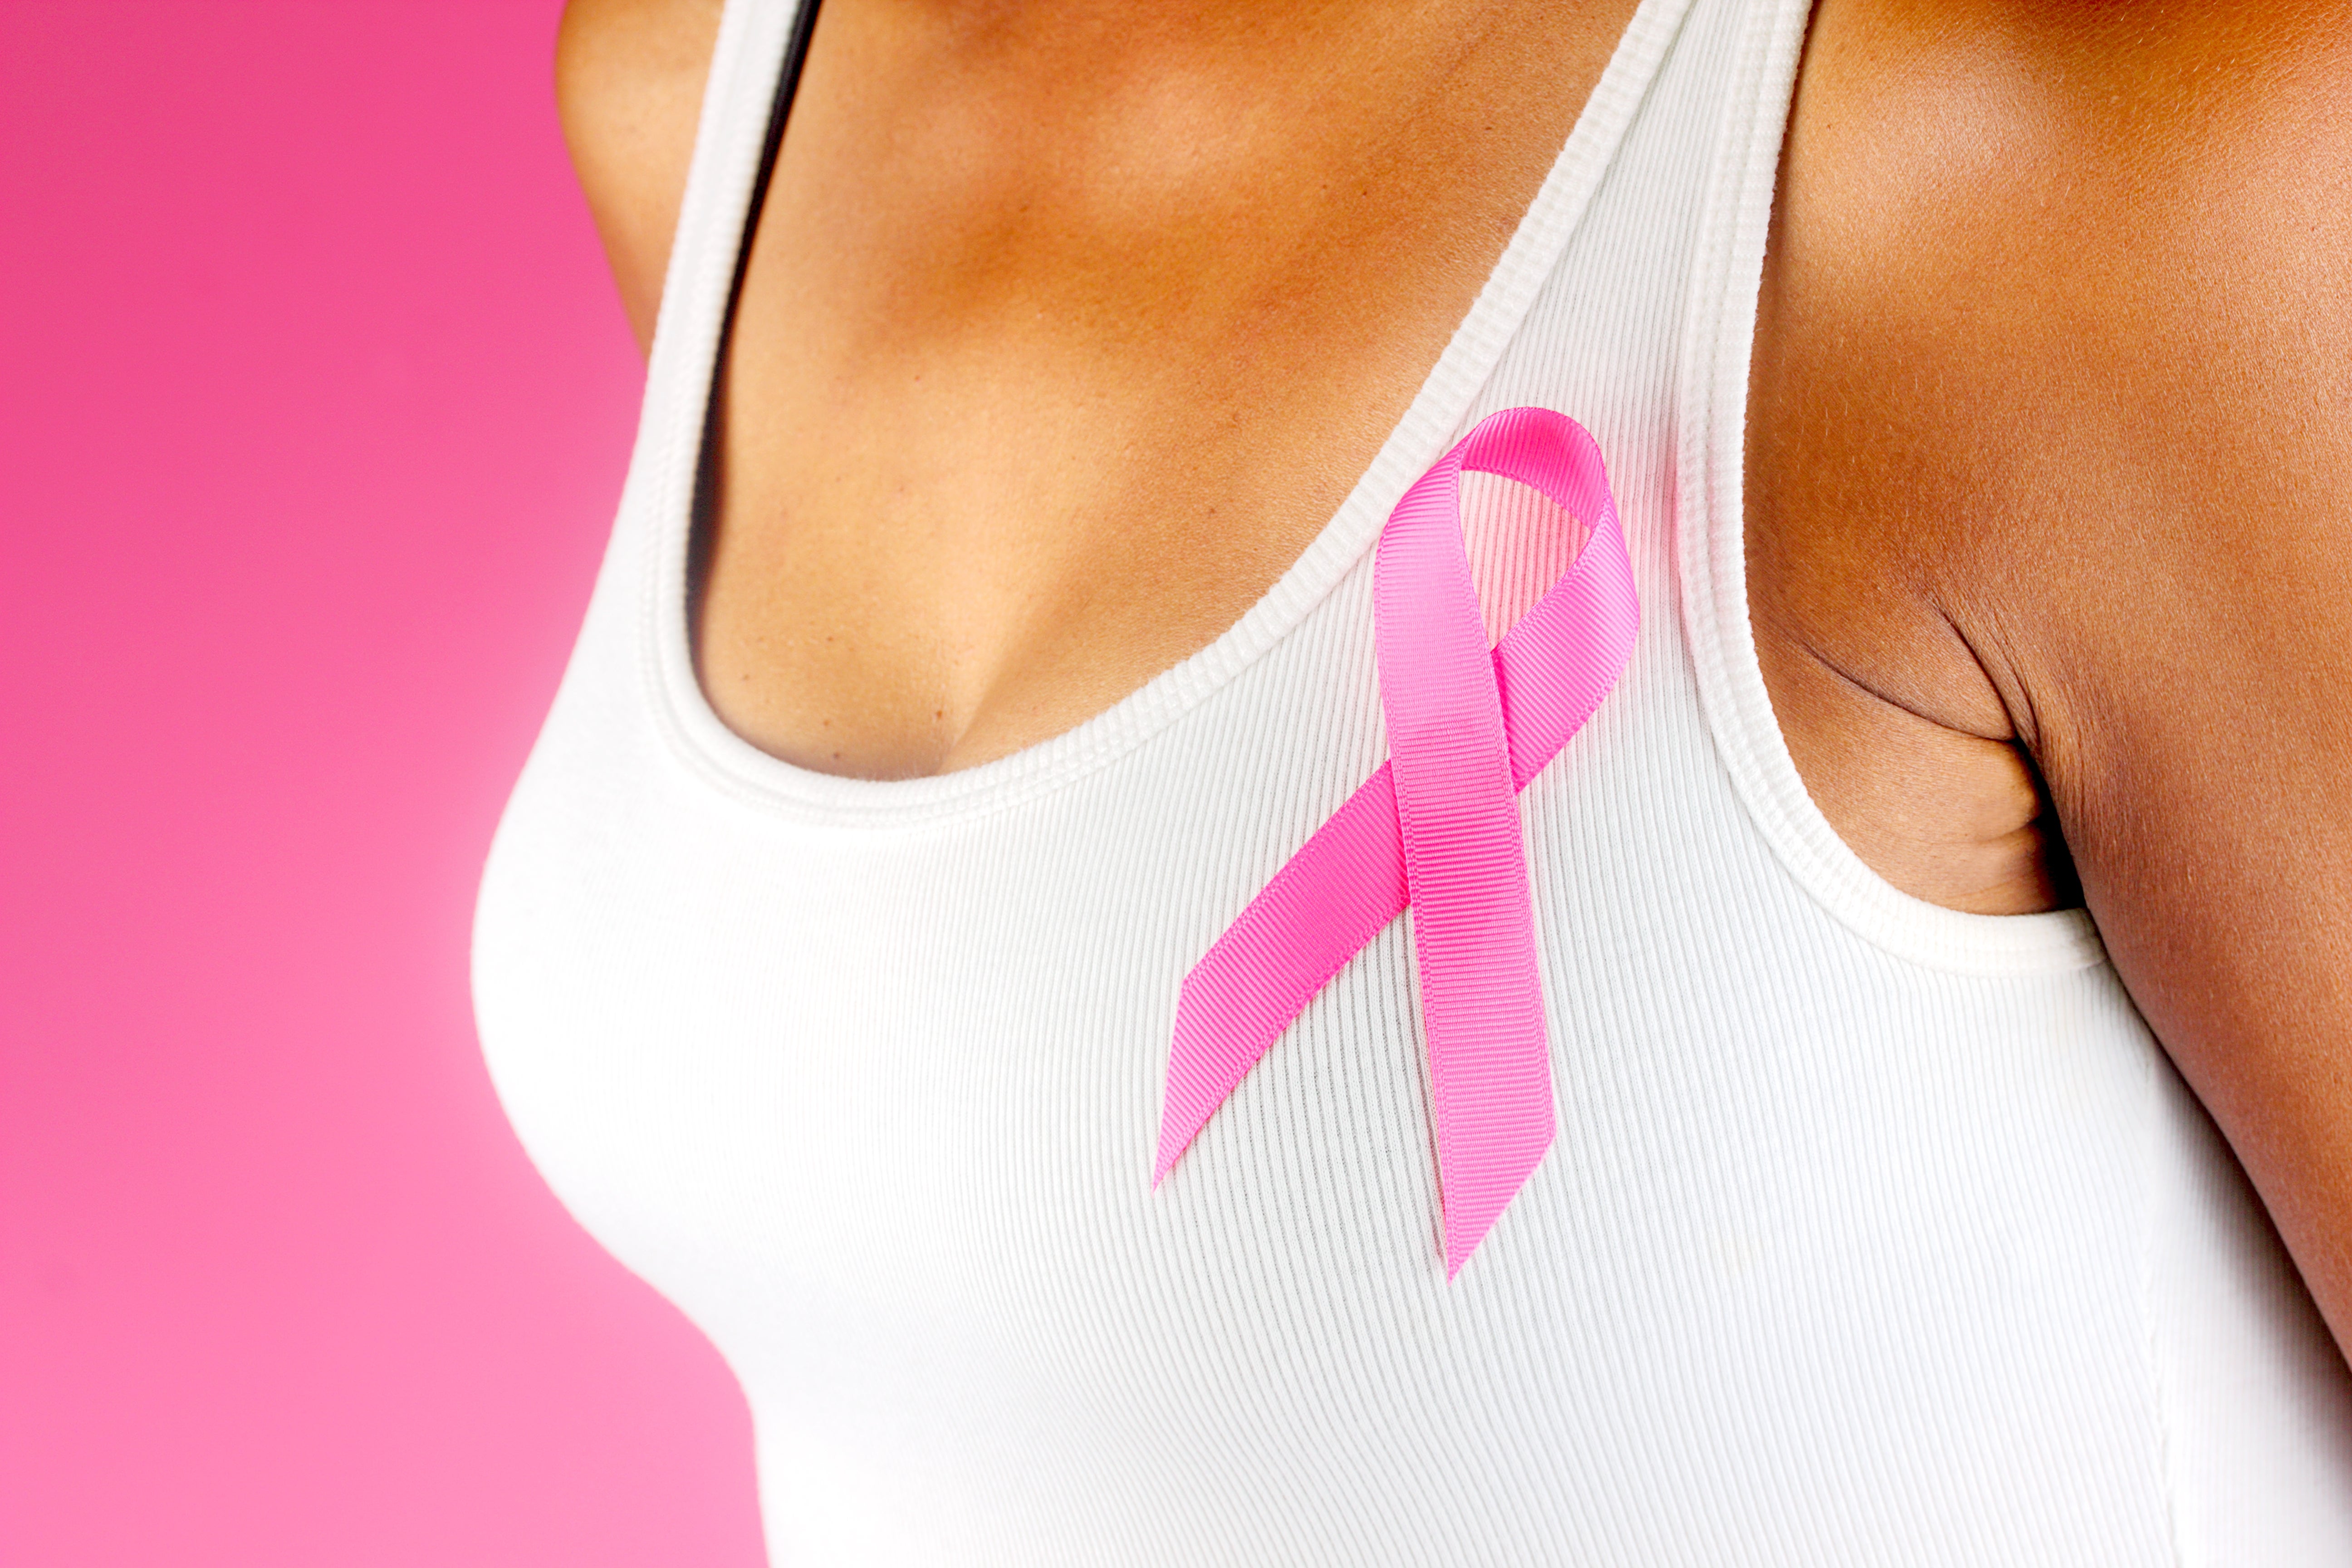 The 'Know Your Girls' Campaign Makes A Significant Push To Decrease Breast Cancer Mortality Rates Among Black Women
